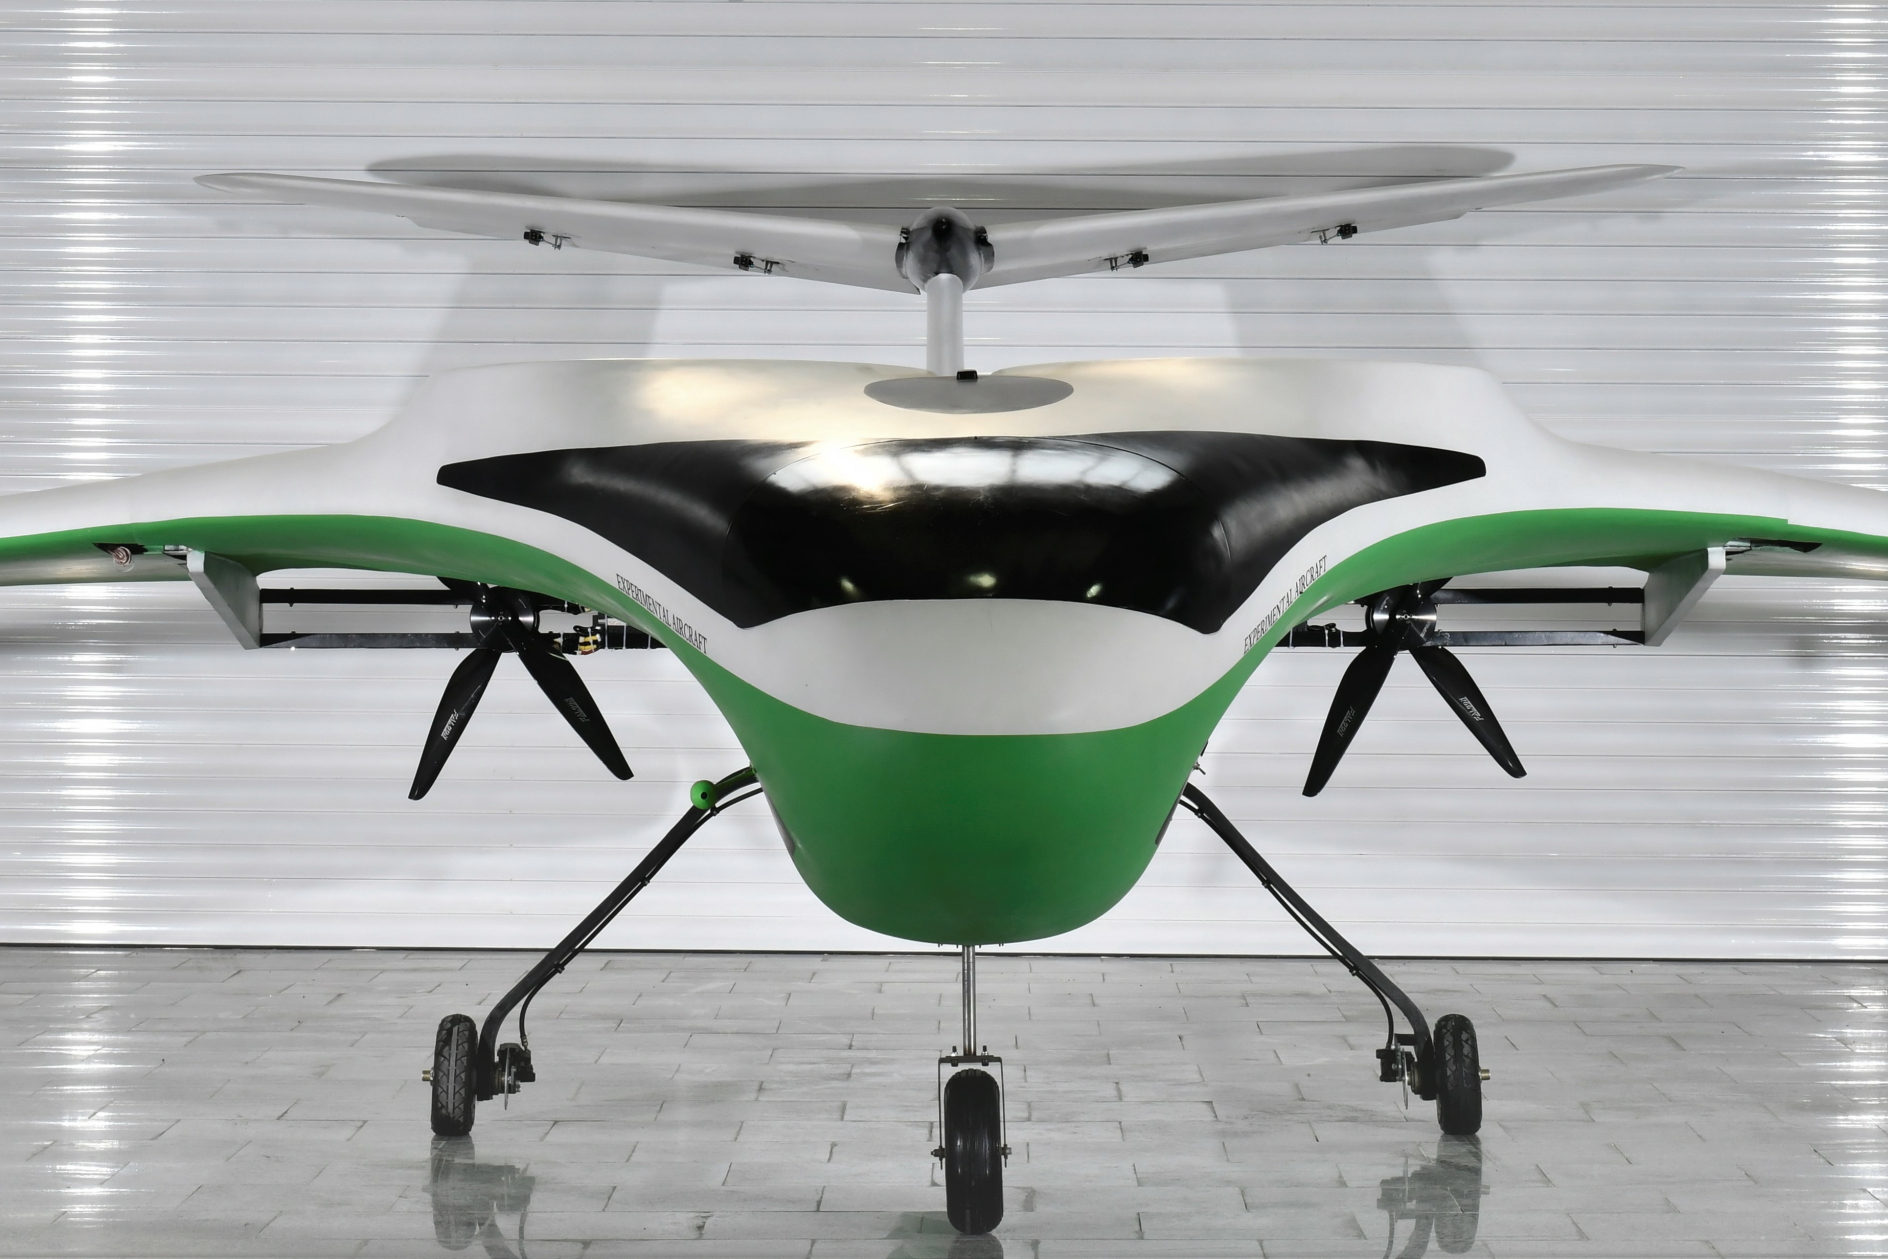 Samad Aerospace’s second eVTOL prototype, the eStarling aircraft, has completed hover tests. Designed for intercity transport, the eStarling aircraft is being designed to combine a helicopter’s vertical ability to take off and land from almost anywhere, with the speed and range of a business jet Click to enlarge.